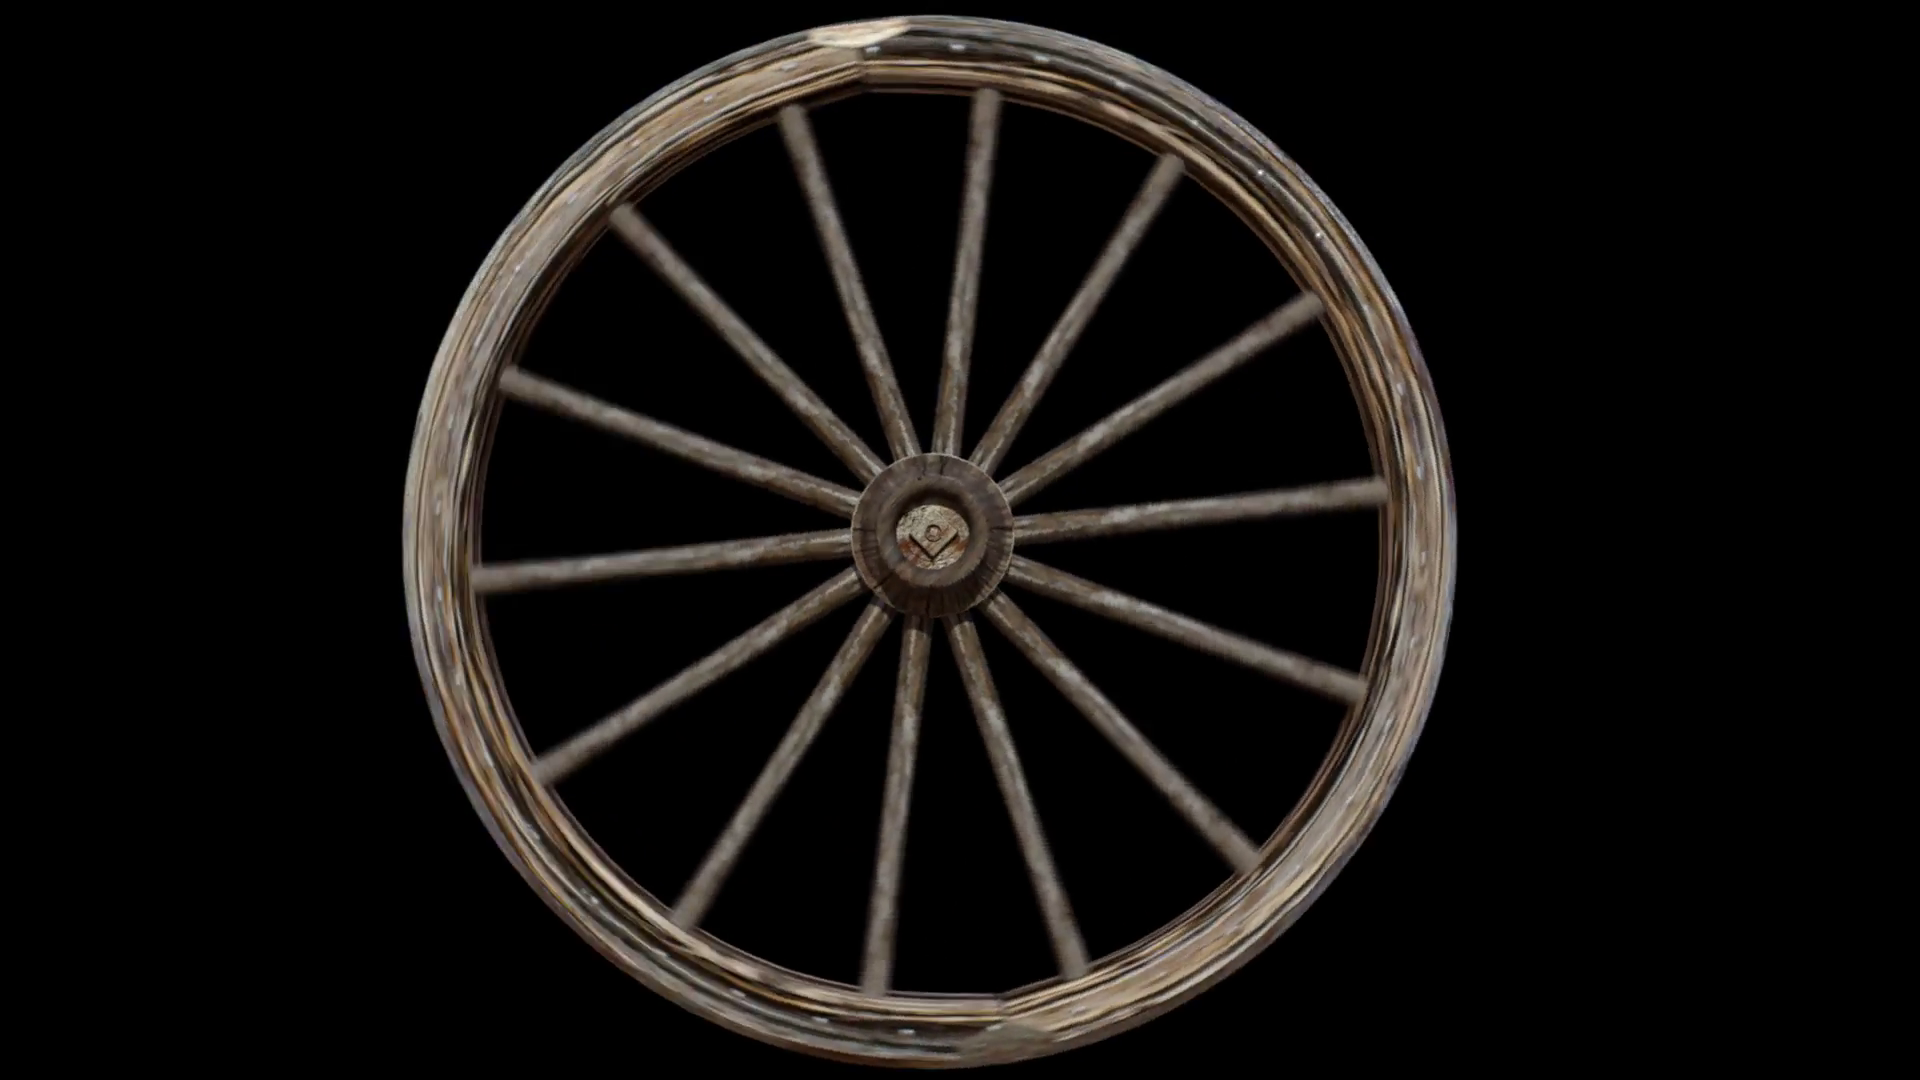 Old Weathered Worn Wooden Wagon Wheel Spinning with Alpha Channel ...